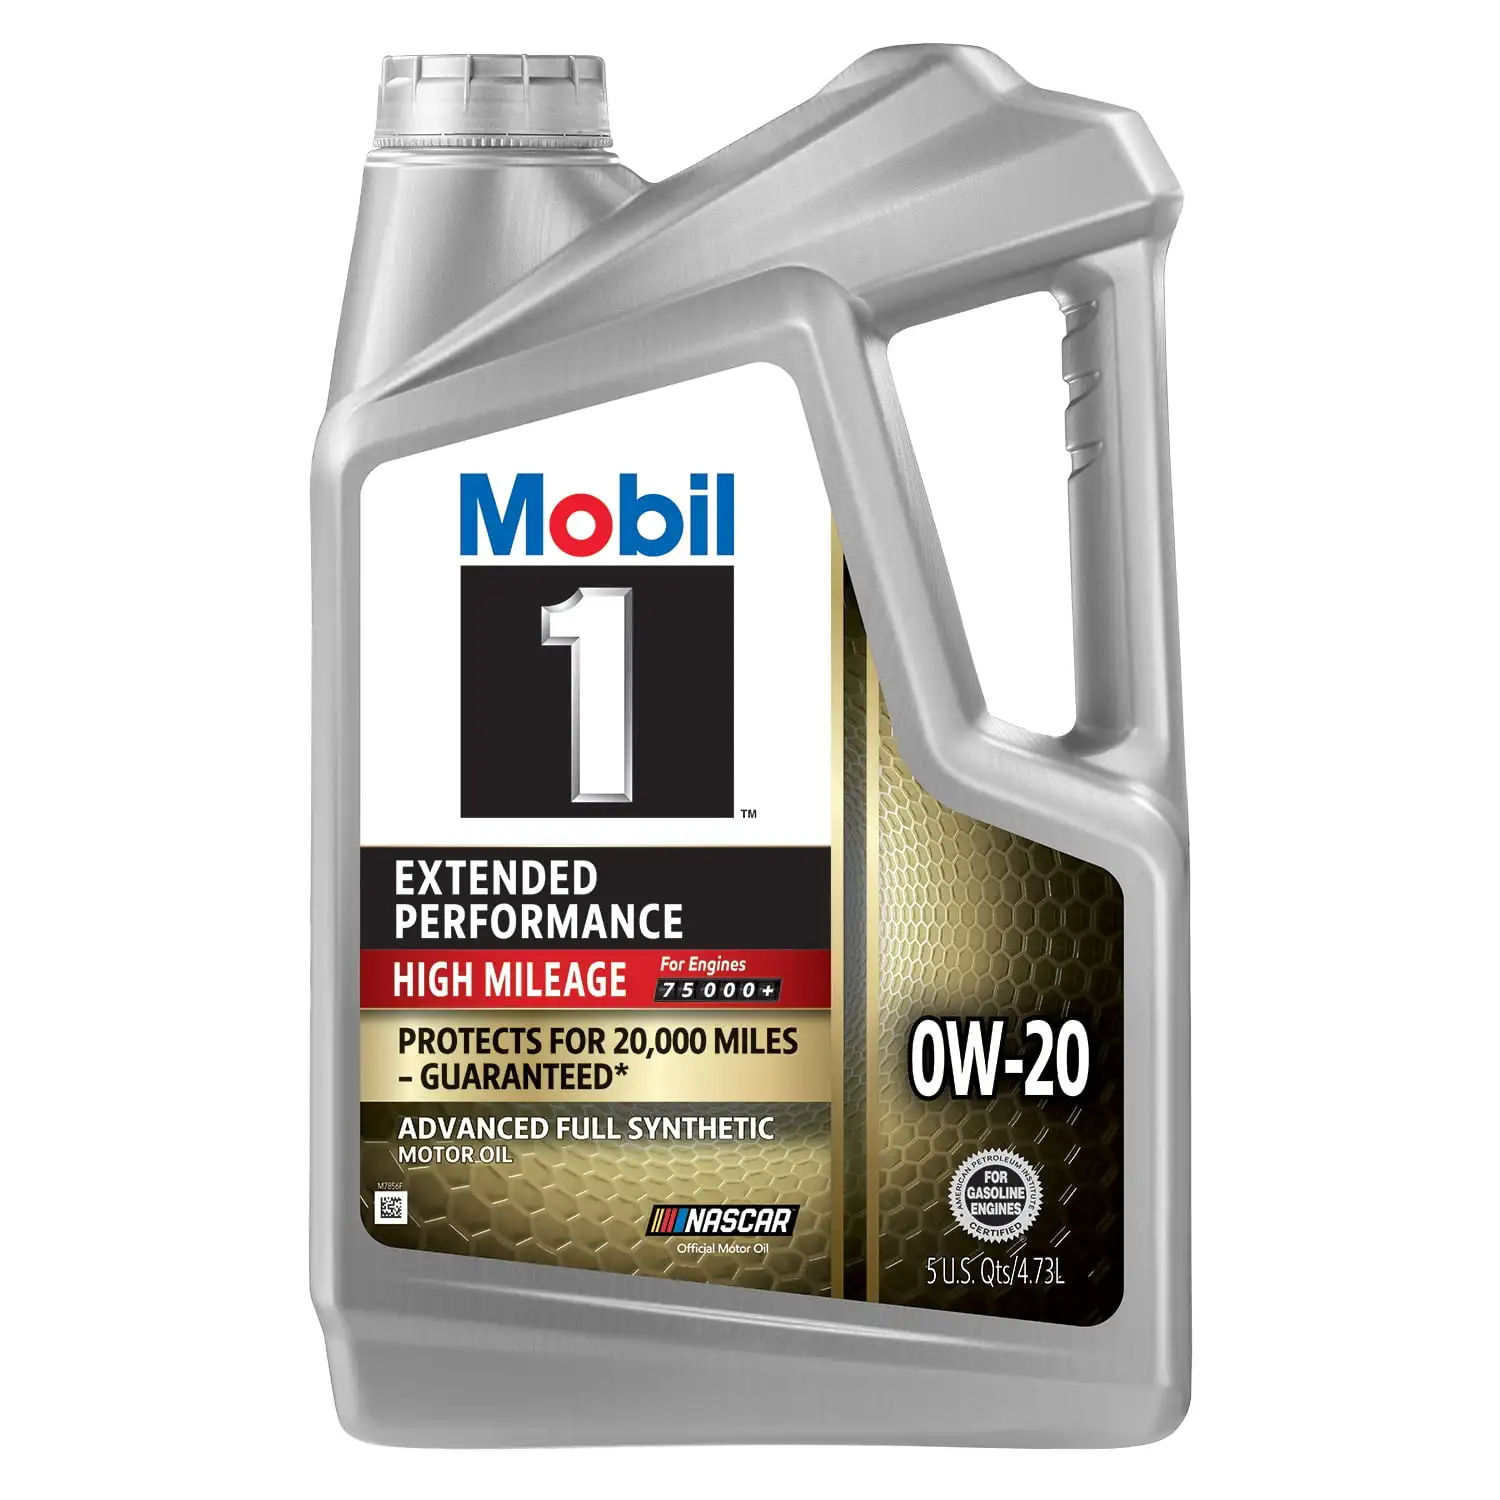 

3-Pack of Extended Performance High Mileage Full Synthetic Motor Oil 0W-20 in 5-Quart Containers